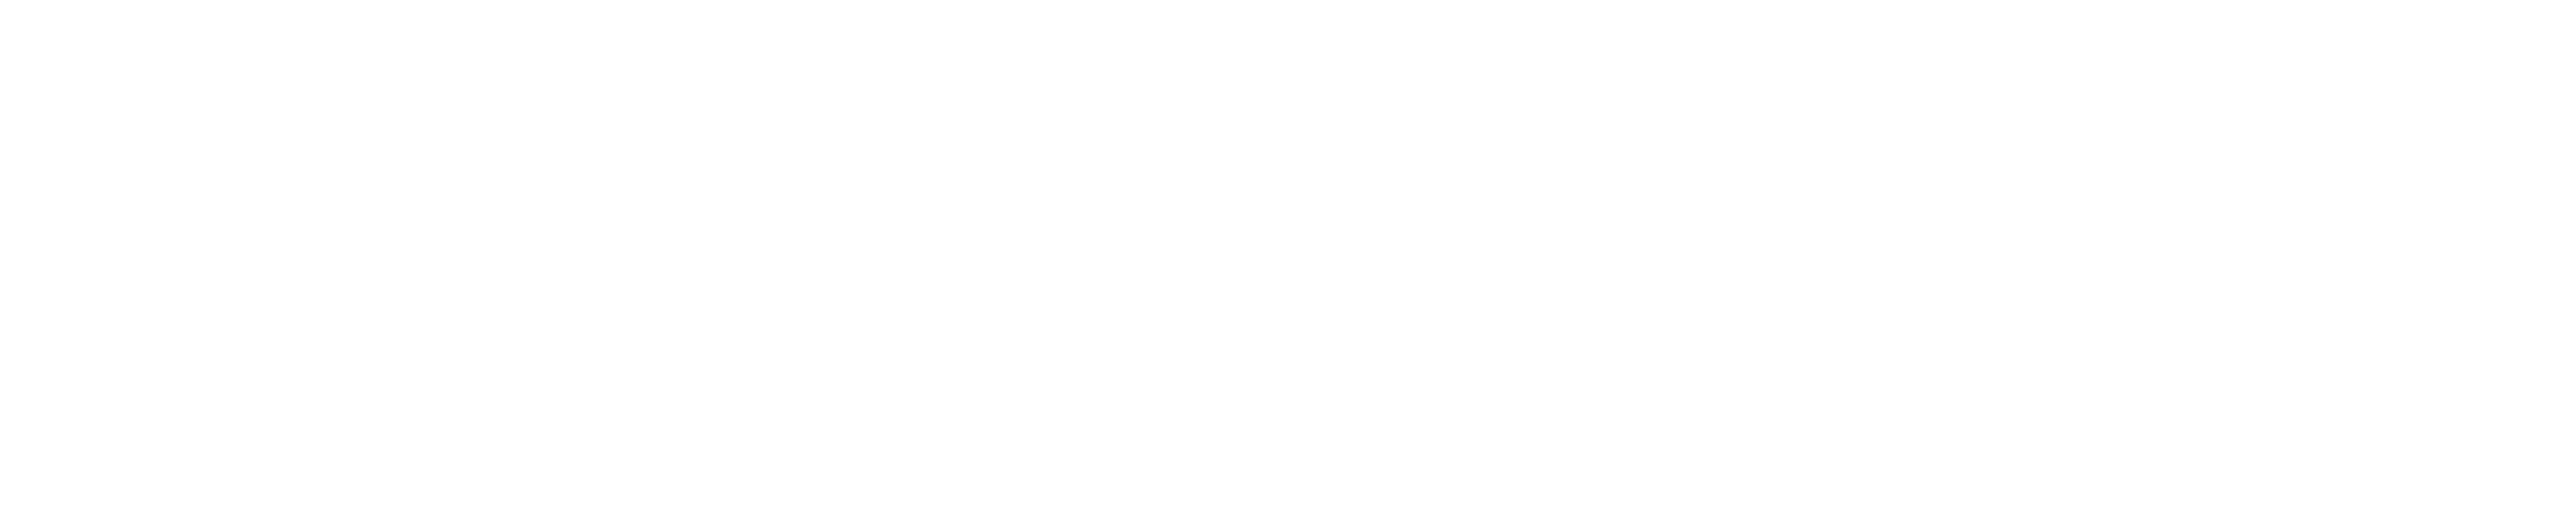 Enjoy the Game with our Special World Juniors Menu